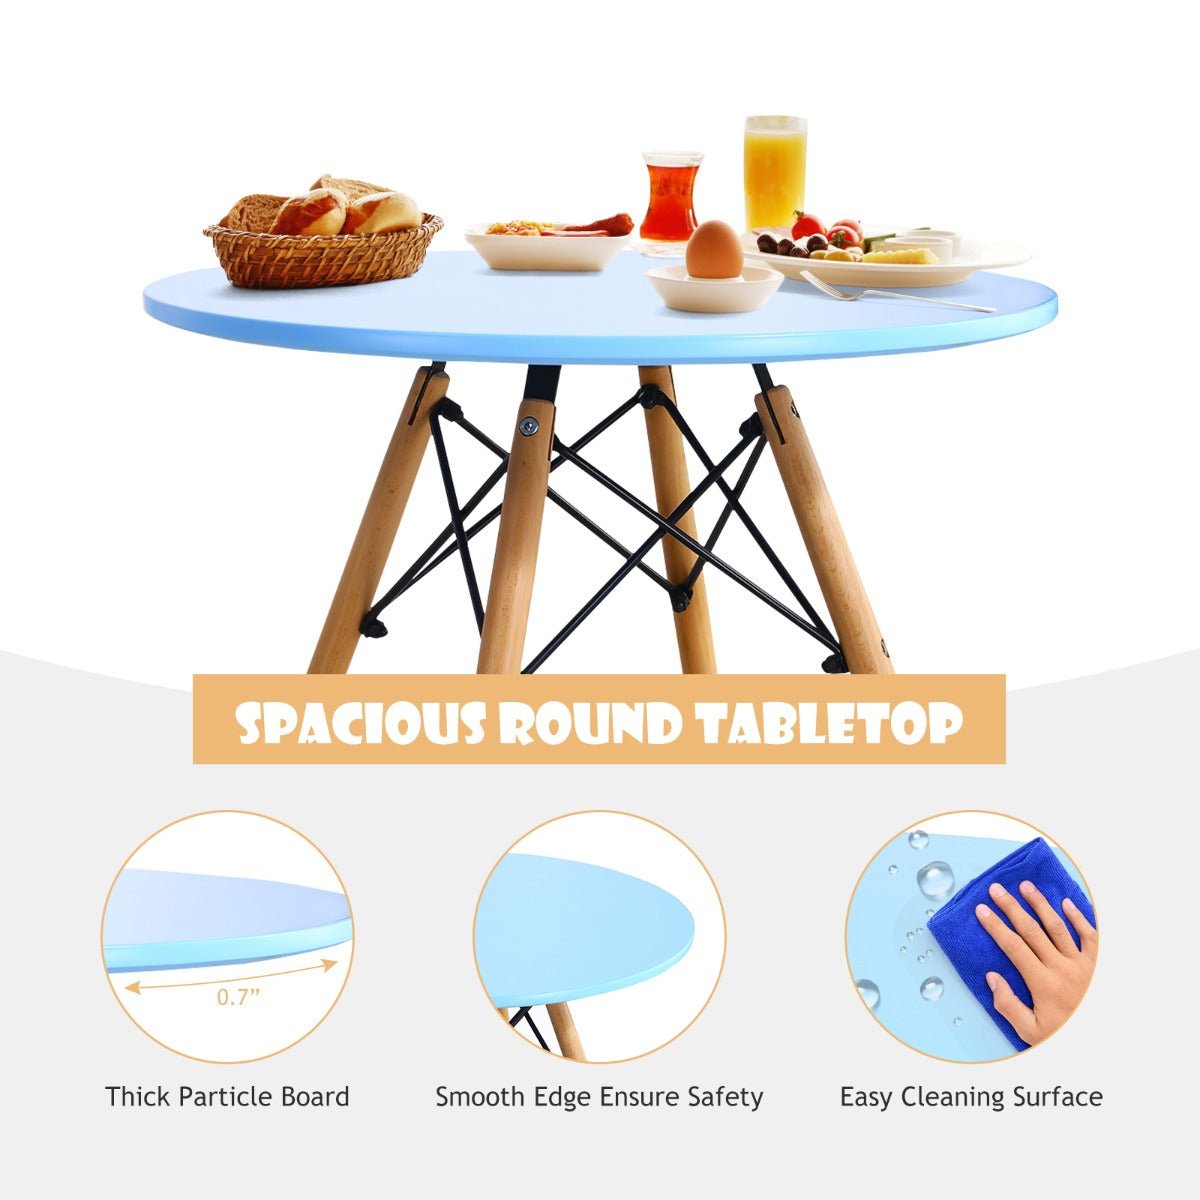 Inspiring Children's Table and Chairs Set - Boost Creativity and Interaction